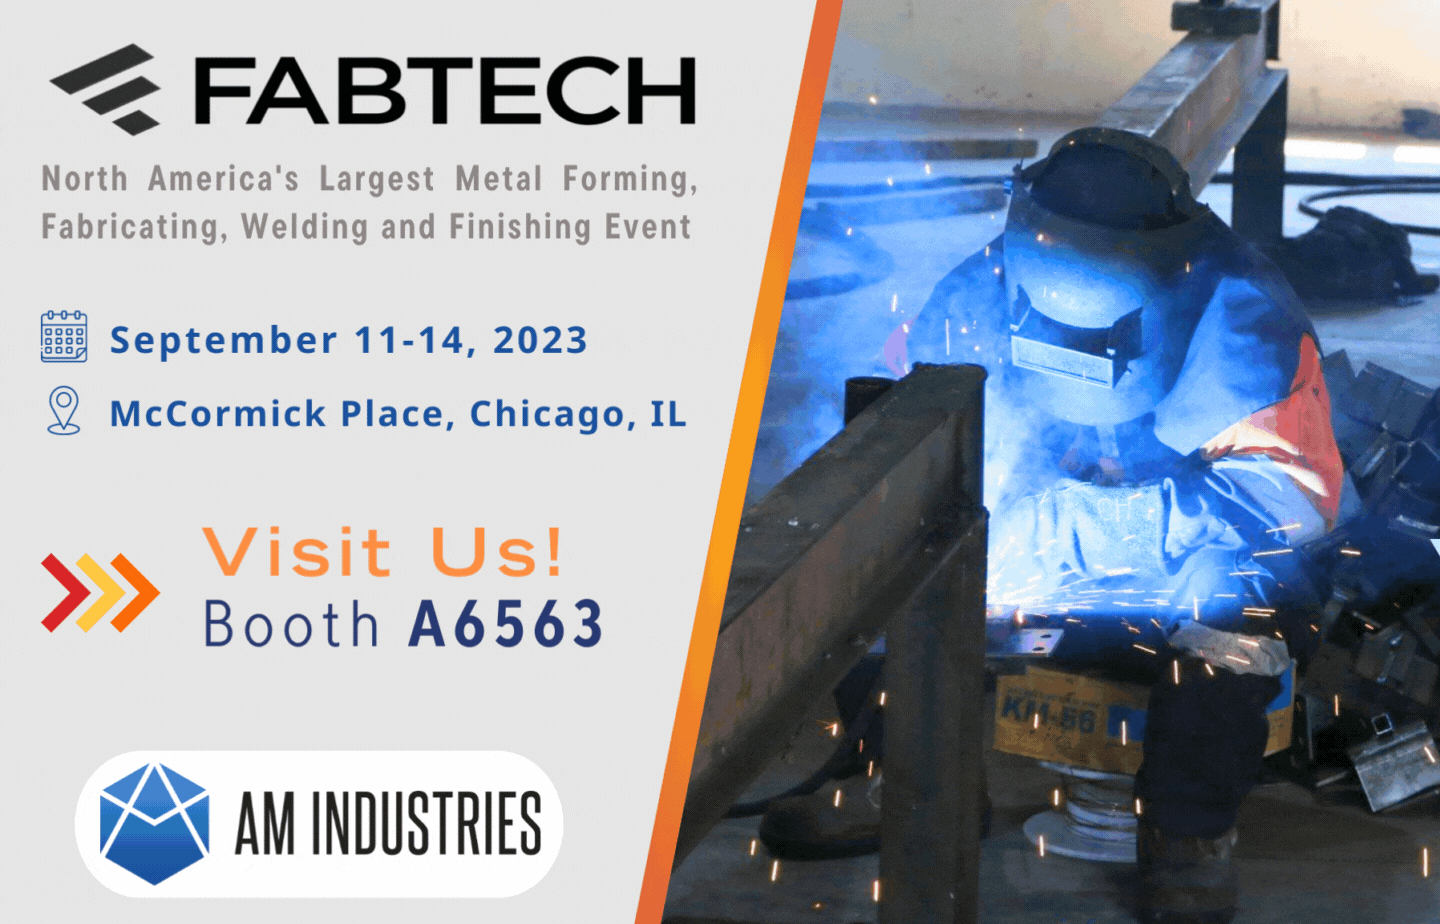 FABTECH EMAIL